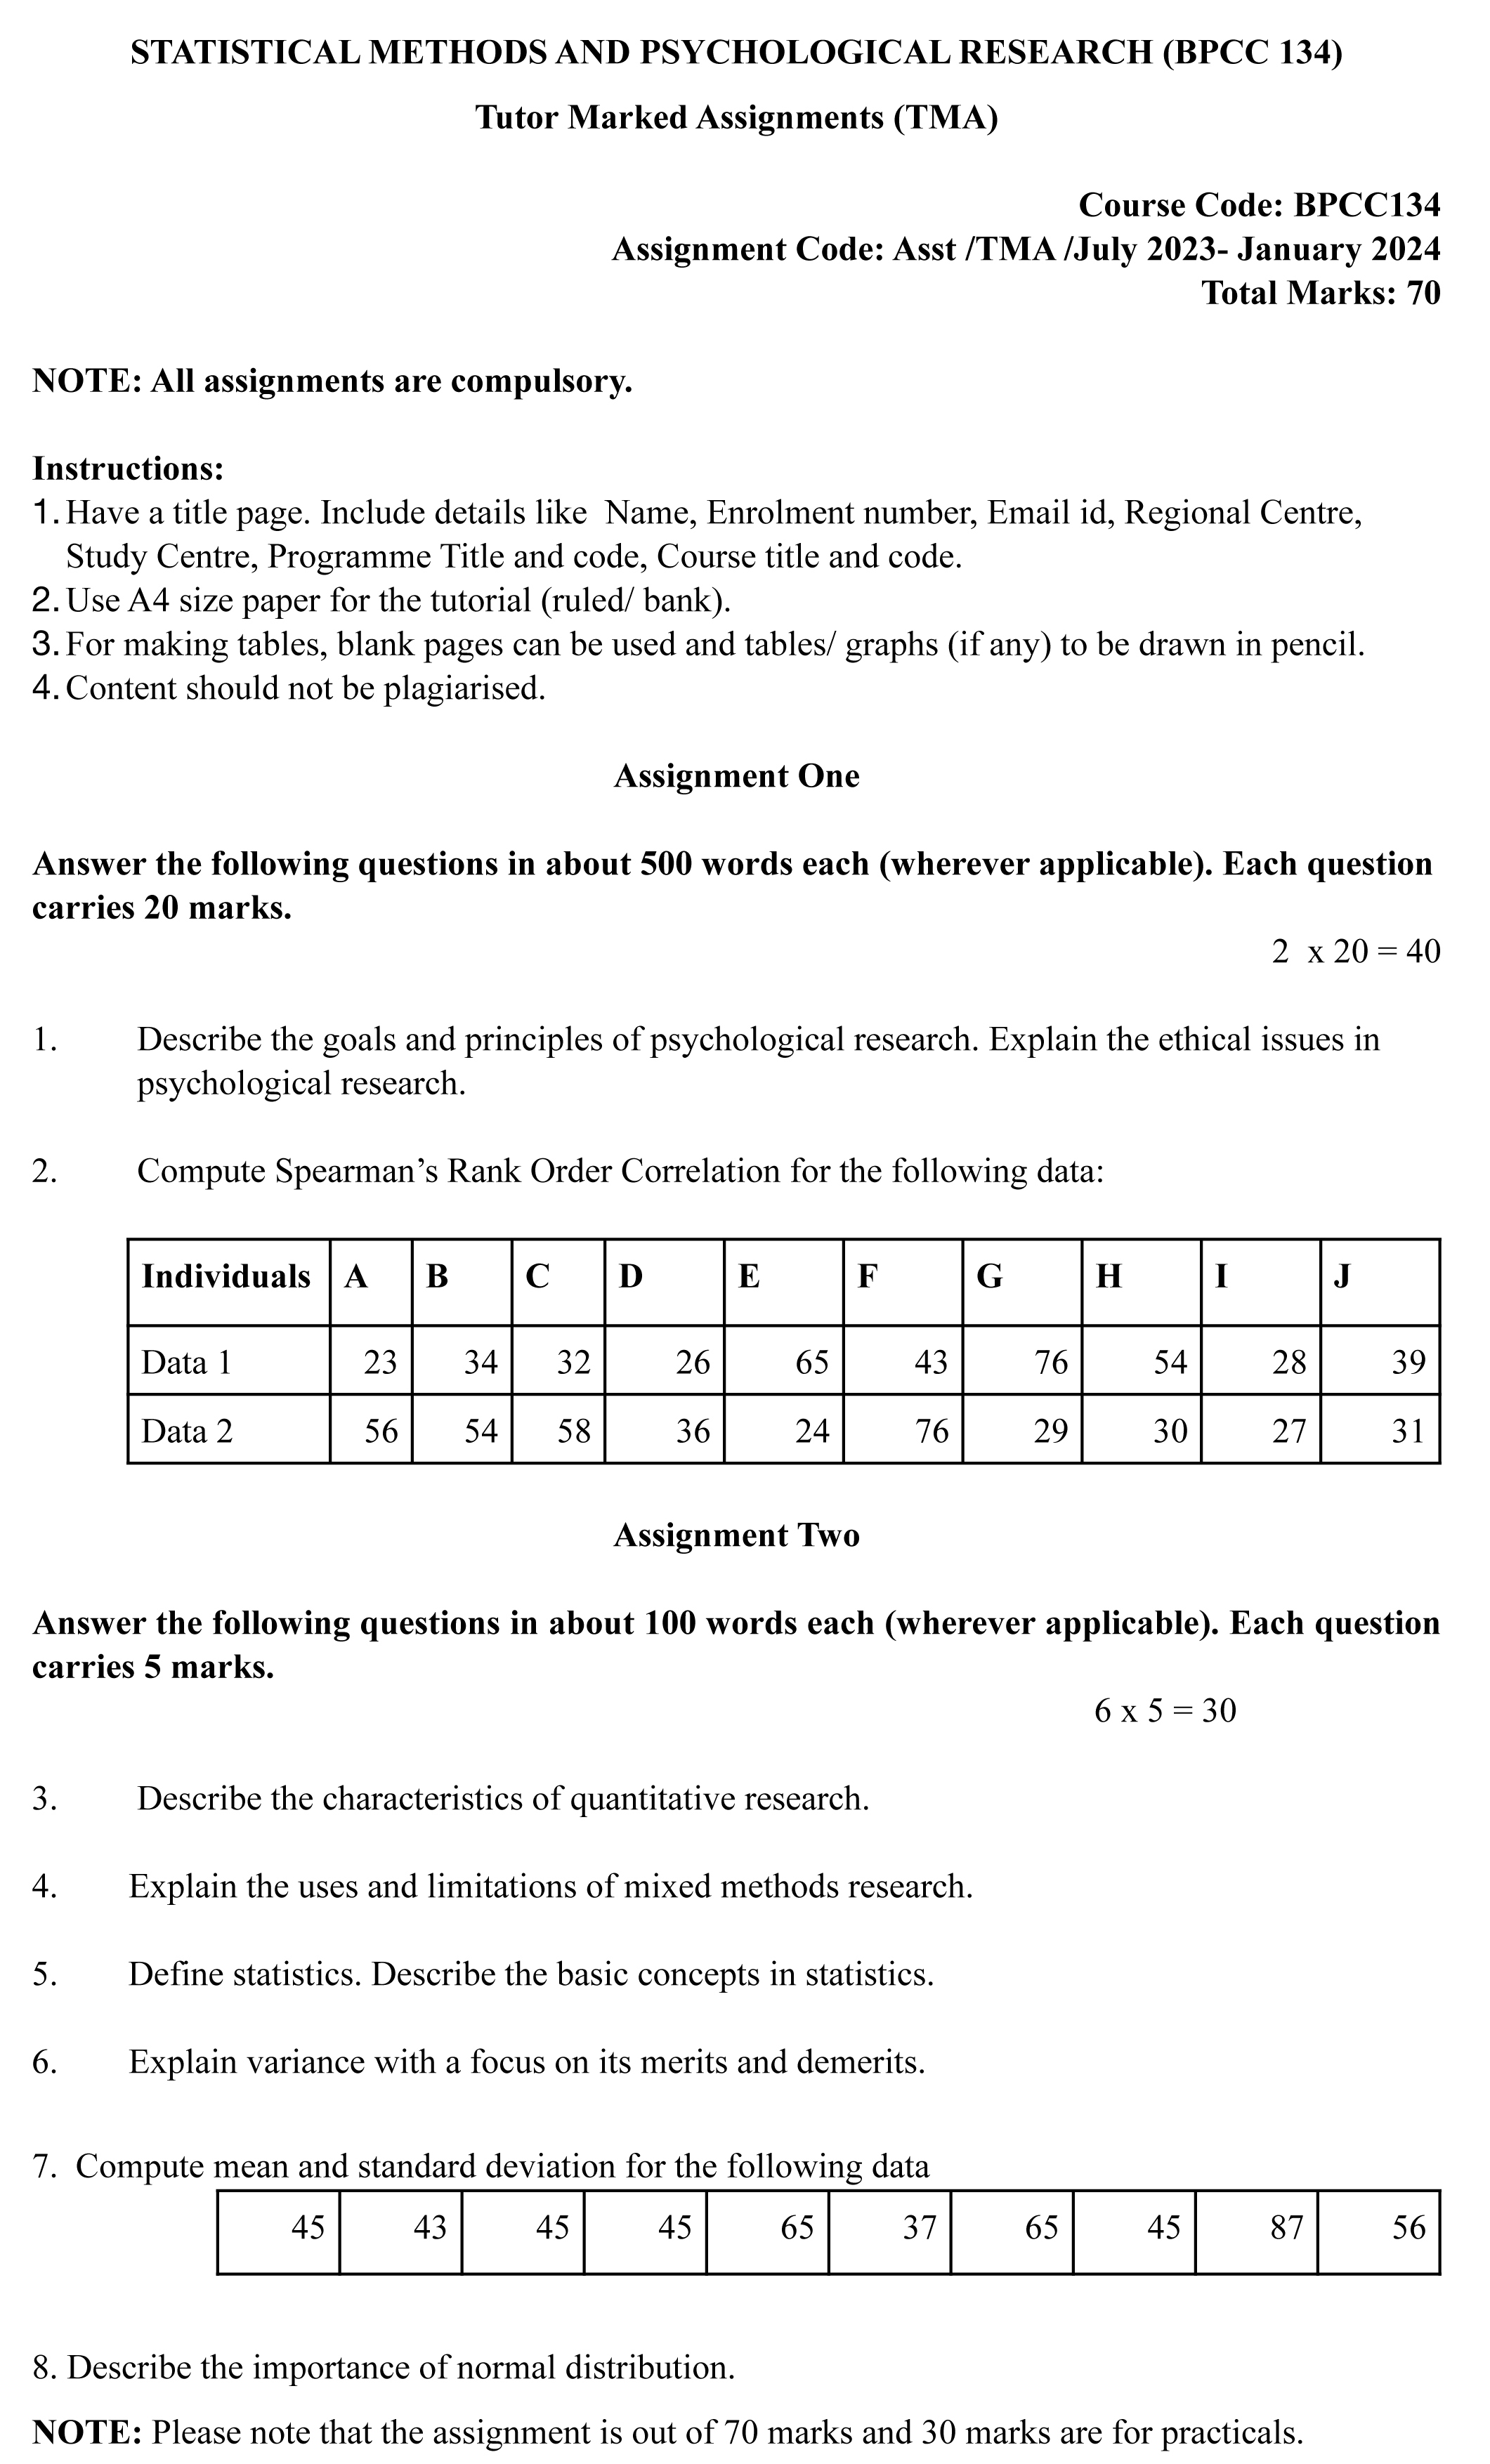 IGNOU BPCC-134 - Statistical Methods and Psychological Research, Latest Solved Assignment-July 2023 - January 2024